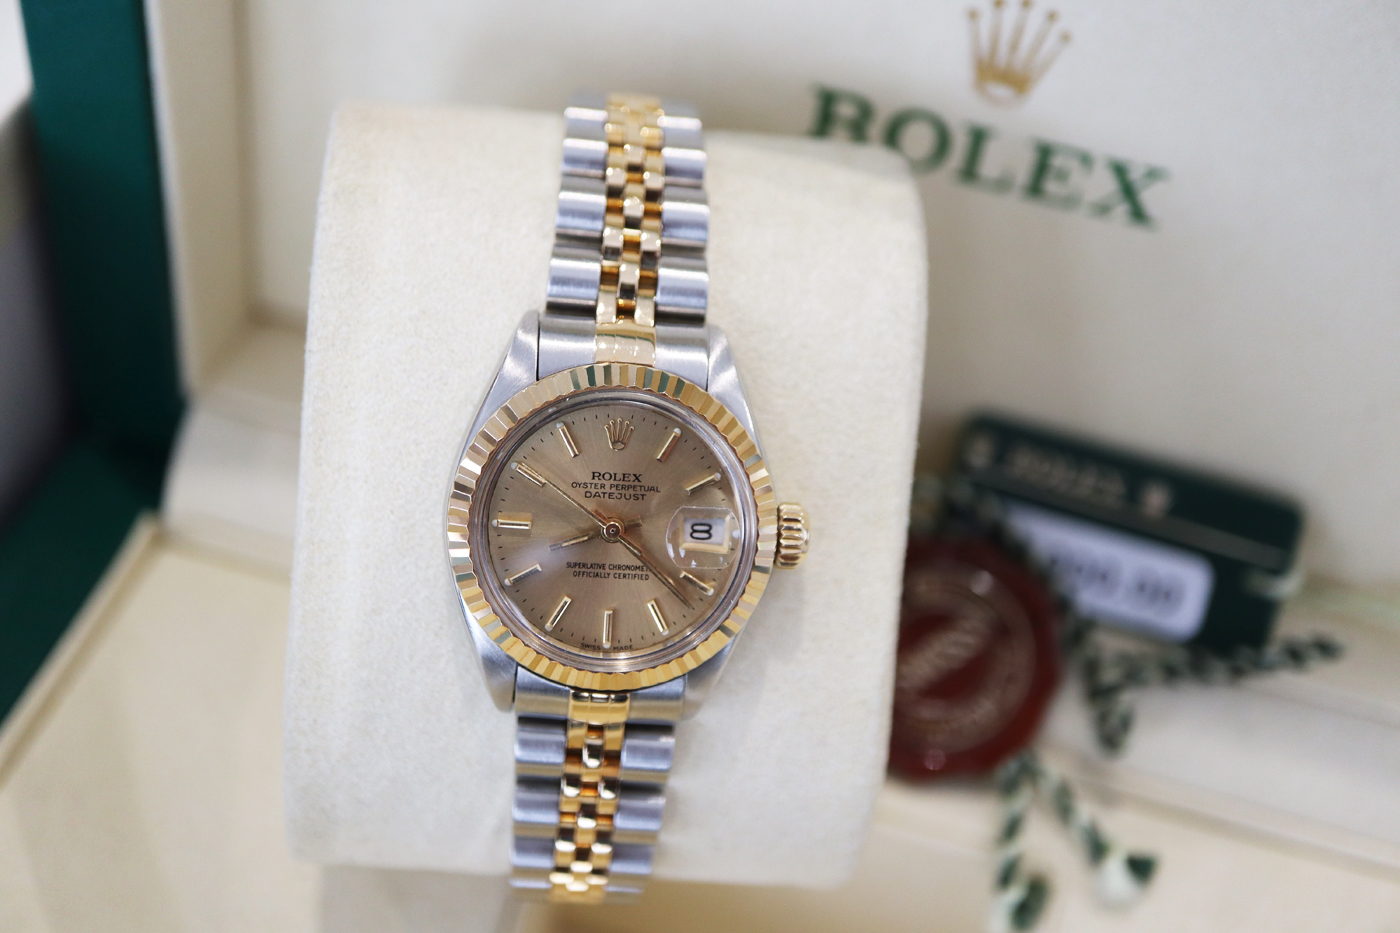 ROLEX DATEJUST 18K / STEEL *CHAMPAGNE* - BOX SET / BOOKLETS / TAGS - Image 2 of 13